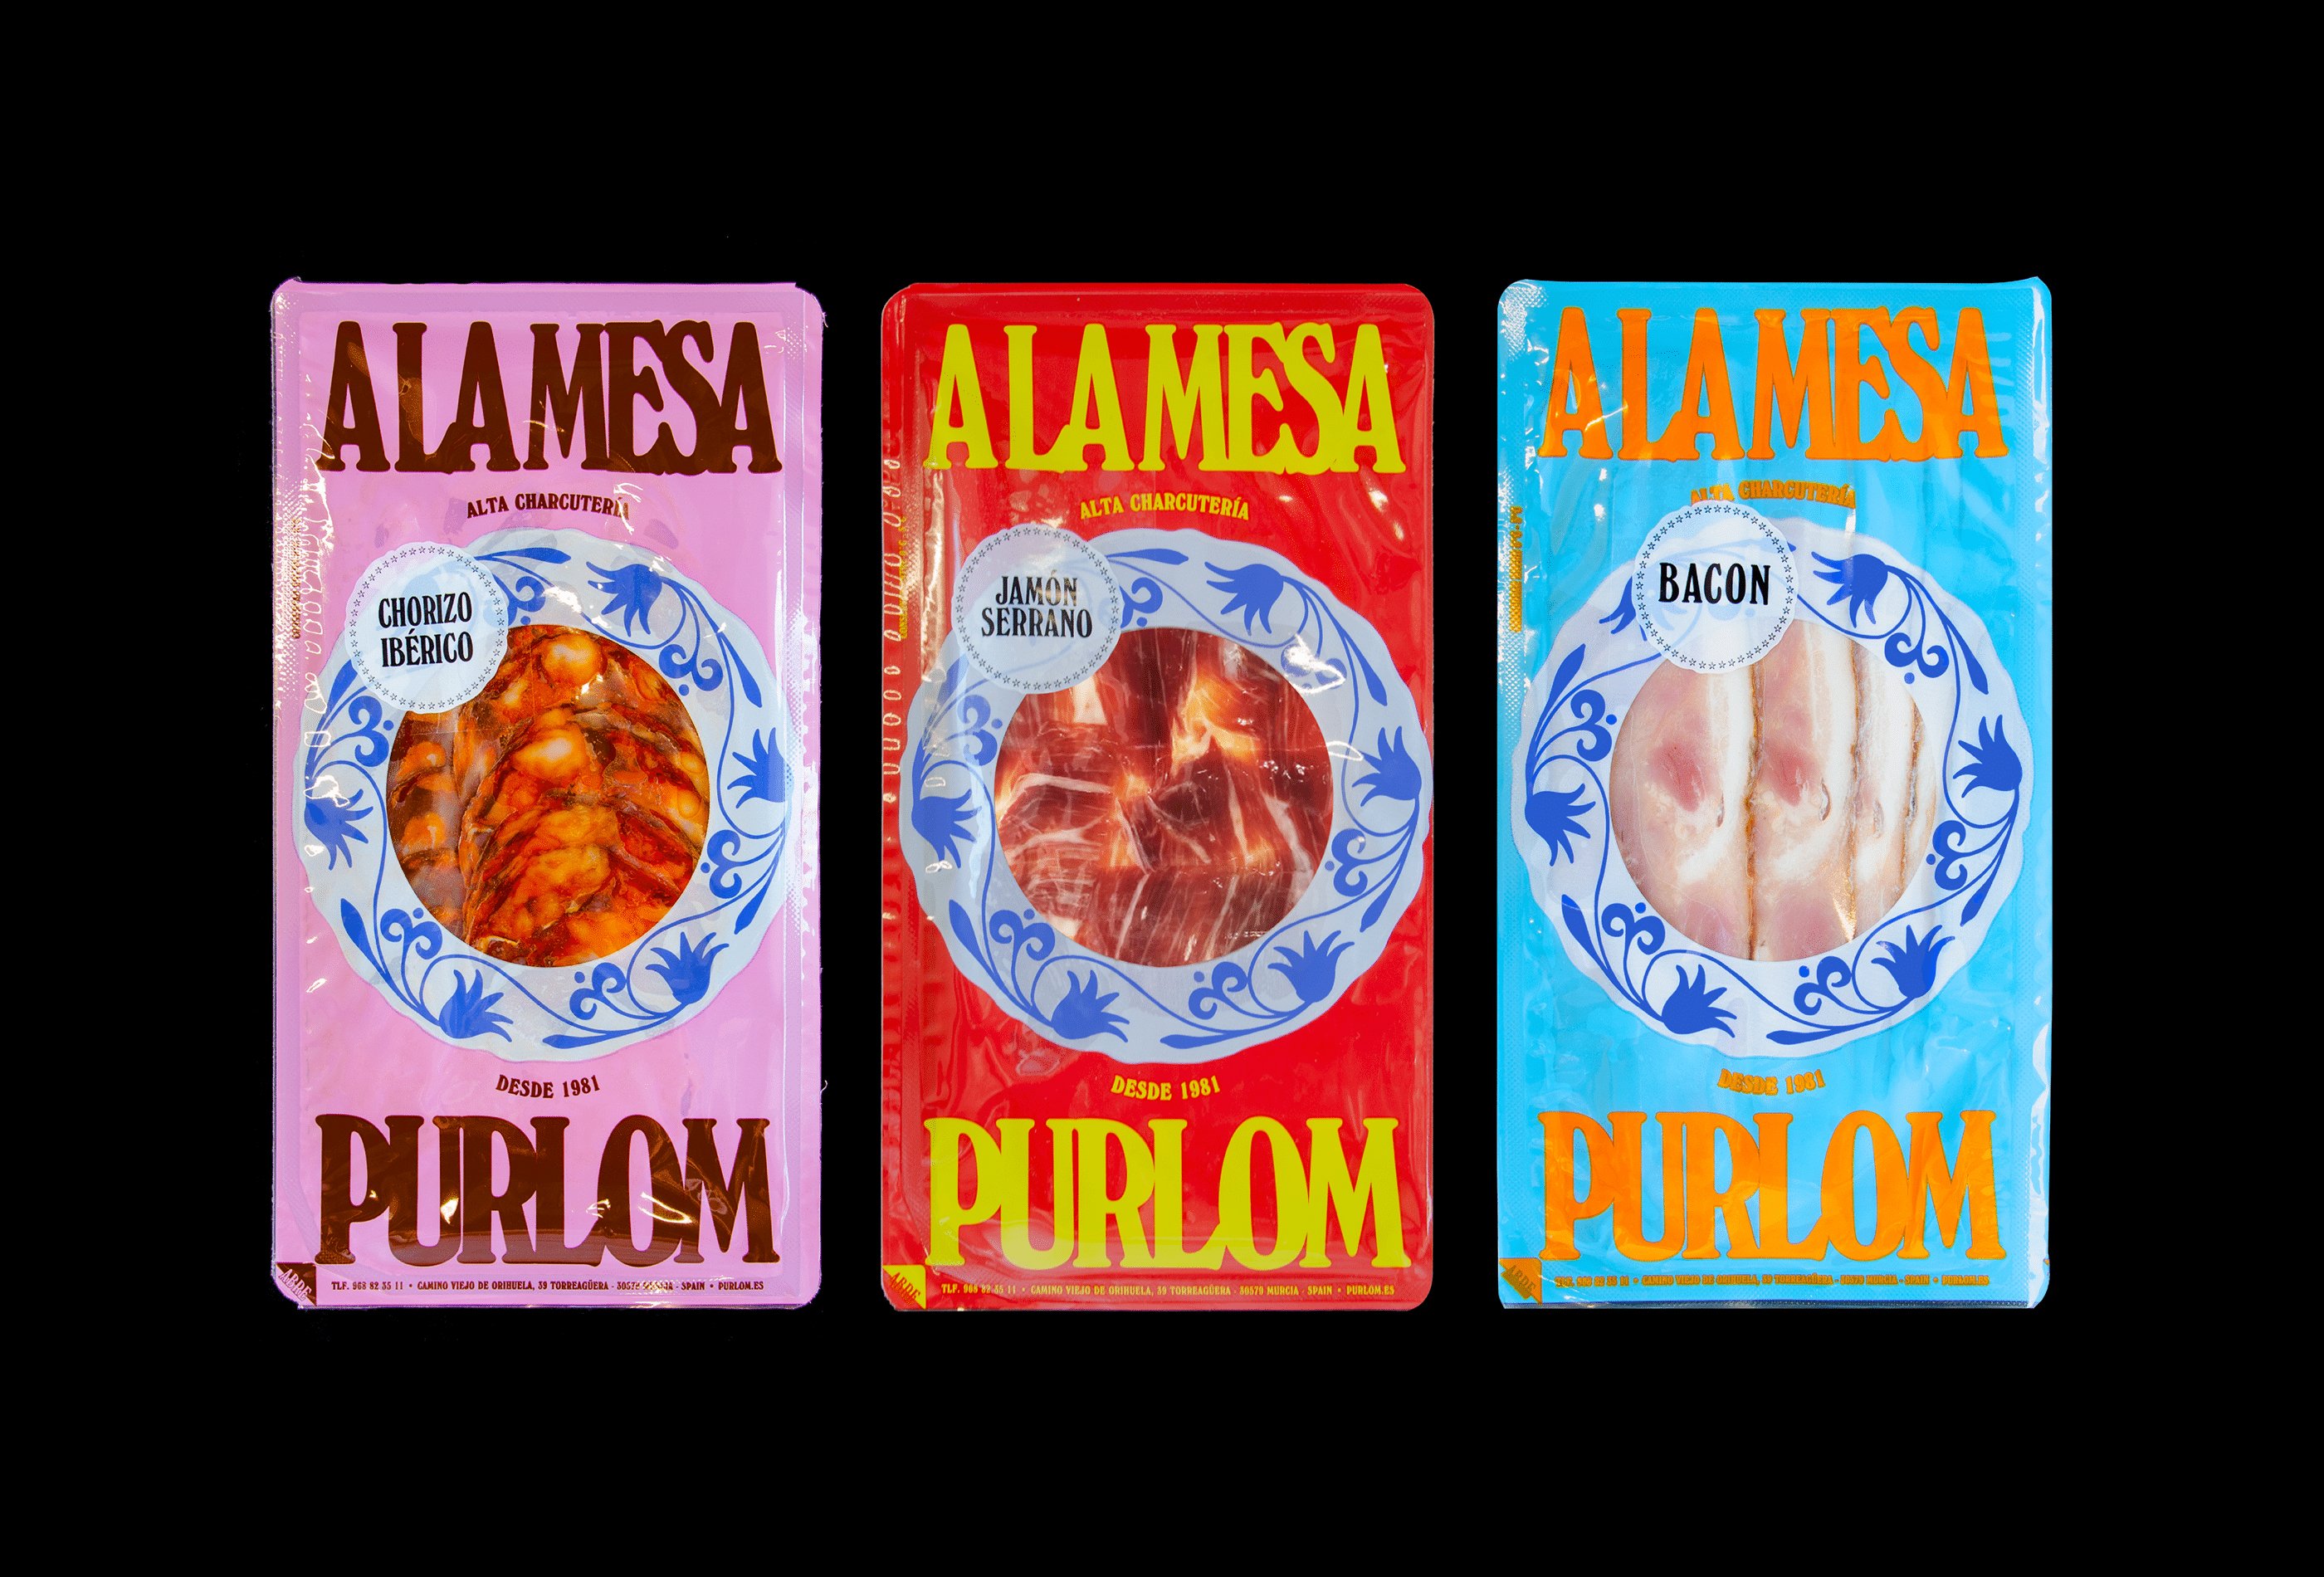 ew brand identity design, art direction, packaging and website for PURLOM’s ’A La Mesa’ cured meat brand created by Spain's Onmi Design